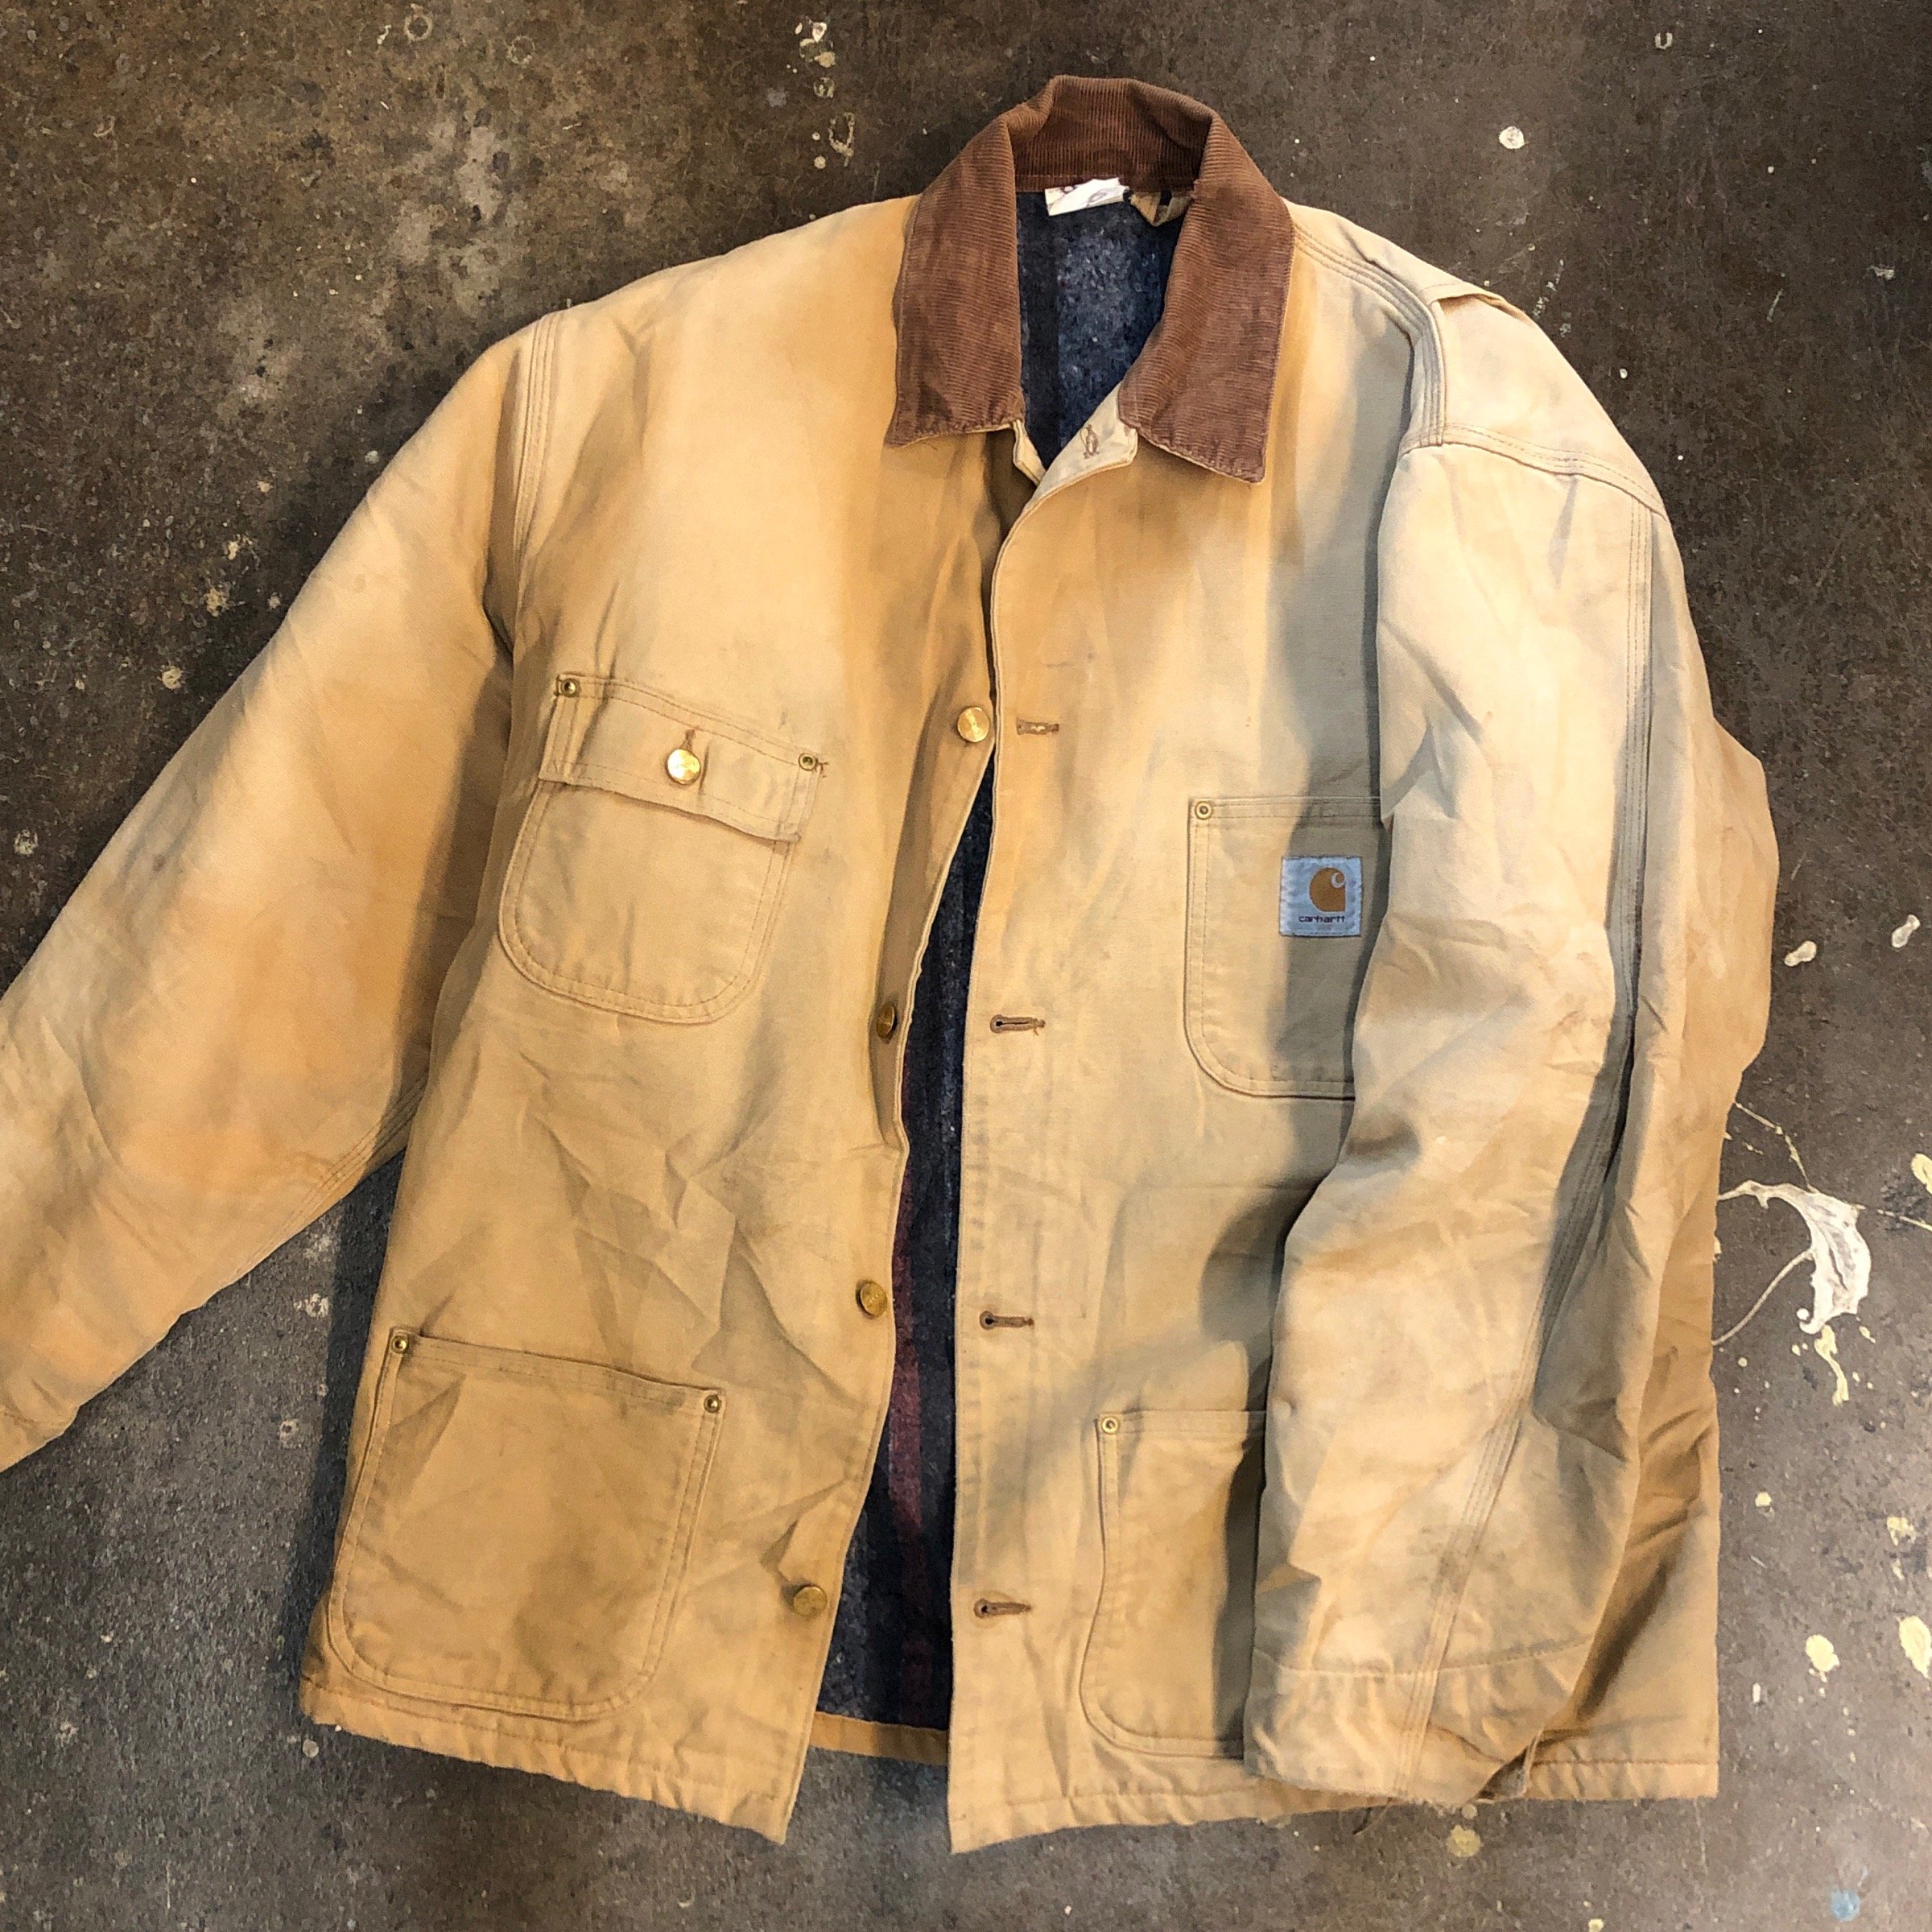 Carhartt Dickies Workwear Jackets By the Bundle- AVAILABLE IN THE